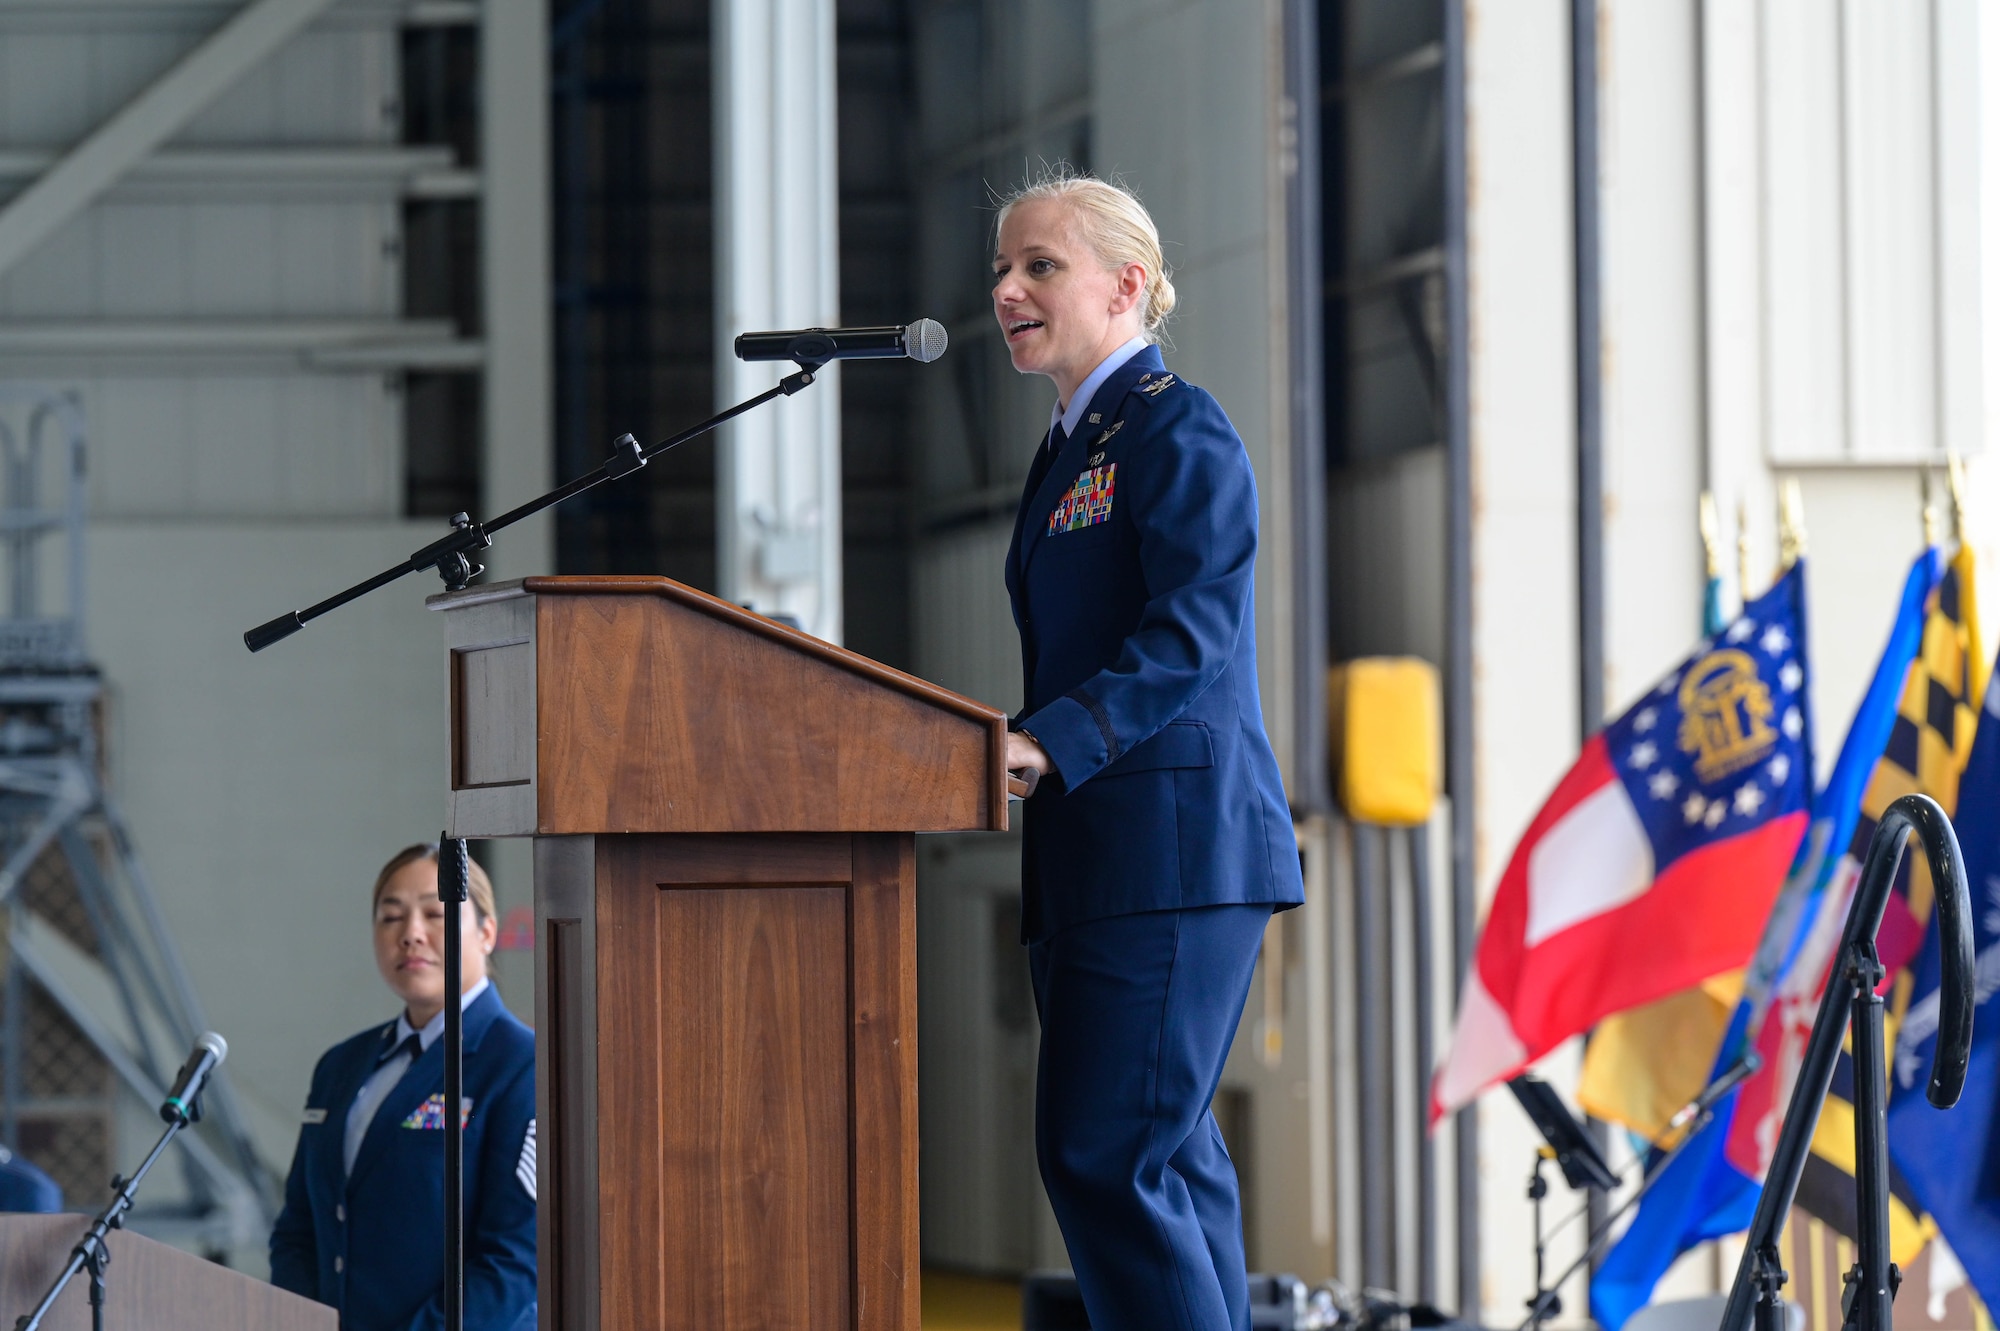 Col. Michele A. Lo Bianco, 15th Wing commander, gives her first speech to the 15th Wing after taking command during a change of command ceremony at Joint Base Pearl Harbor-Hickam, July 8, 2022. Lo Bianco previously served as the Operations Group commander at Joint Base McGuire-Dix-Lakehurst, N.J., prior to her command at Hickam. (U.S. Air Force photo by 1st Lt. Benjamin Aronson)